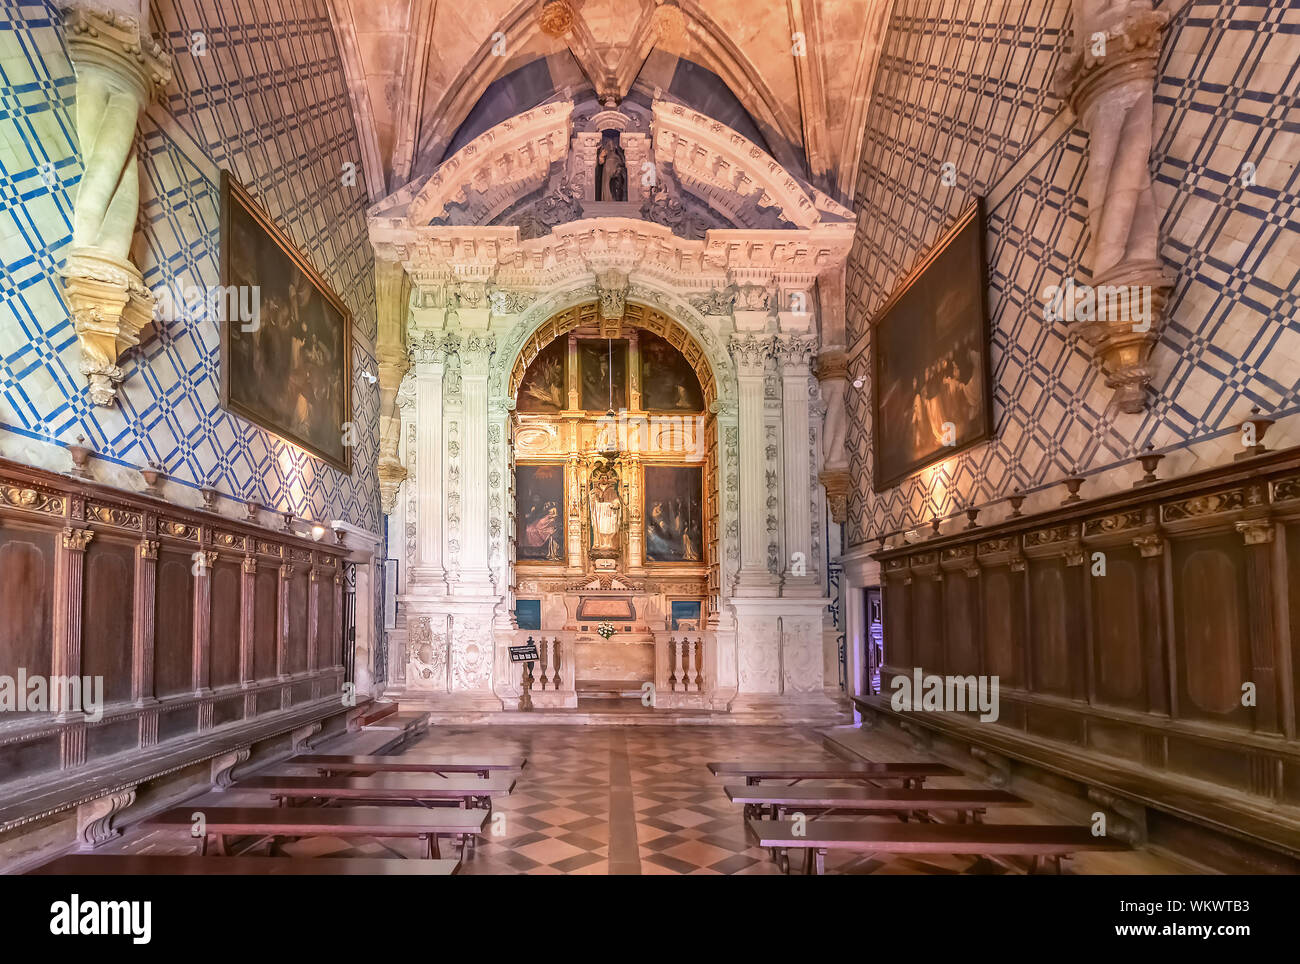 Coimbra, Portugal, July 18, 2019: Chapter room (sala do capitulo) inside Monastery of Santa Cruz. National Monument because the first two kings of Por Stock Photo